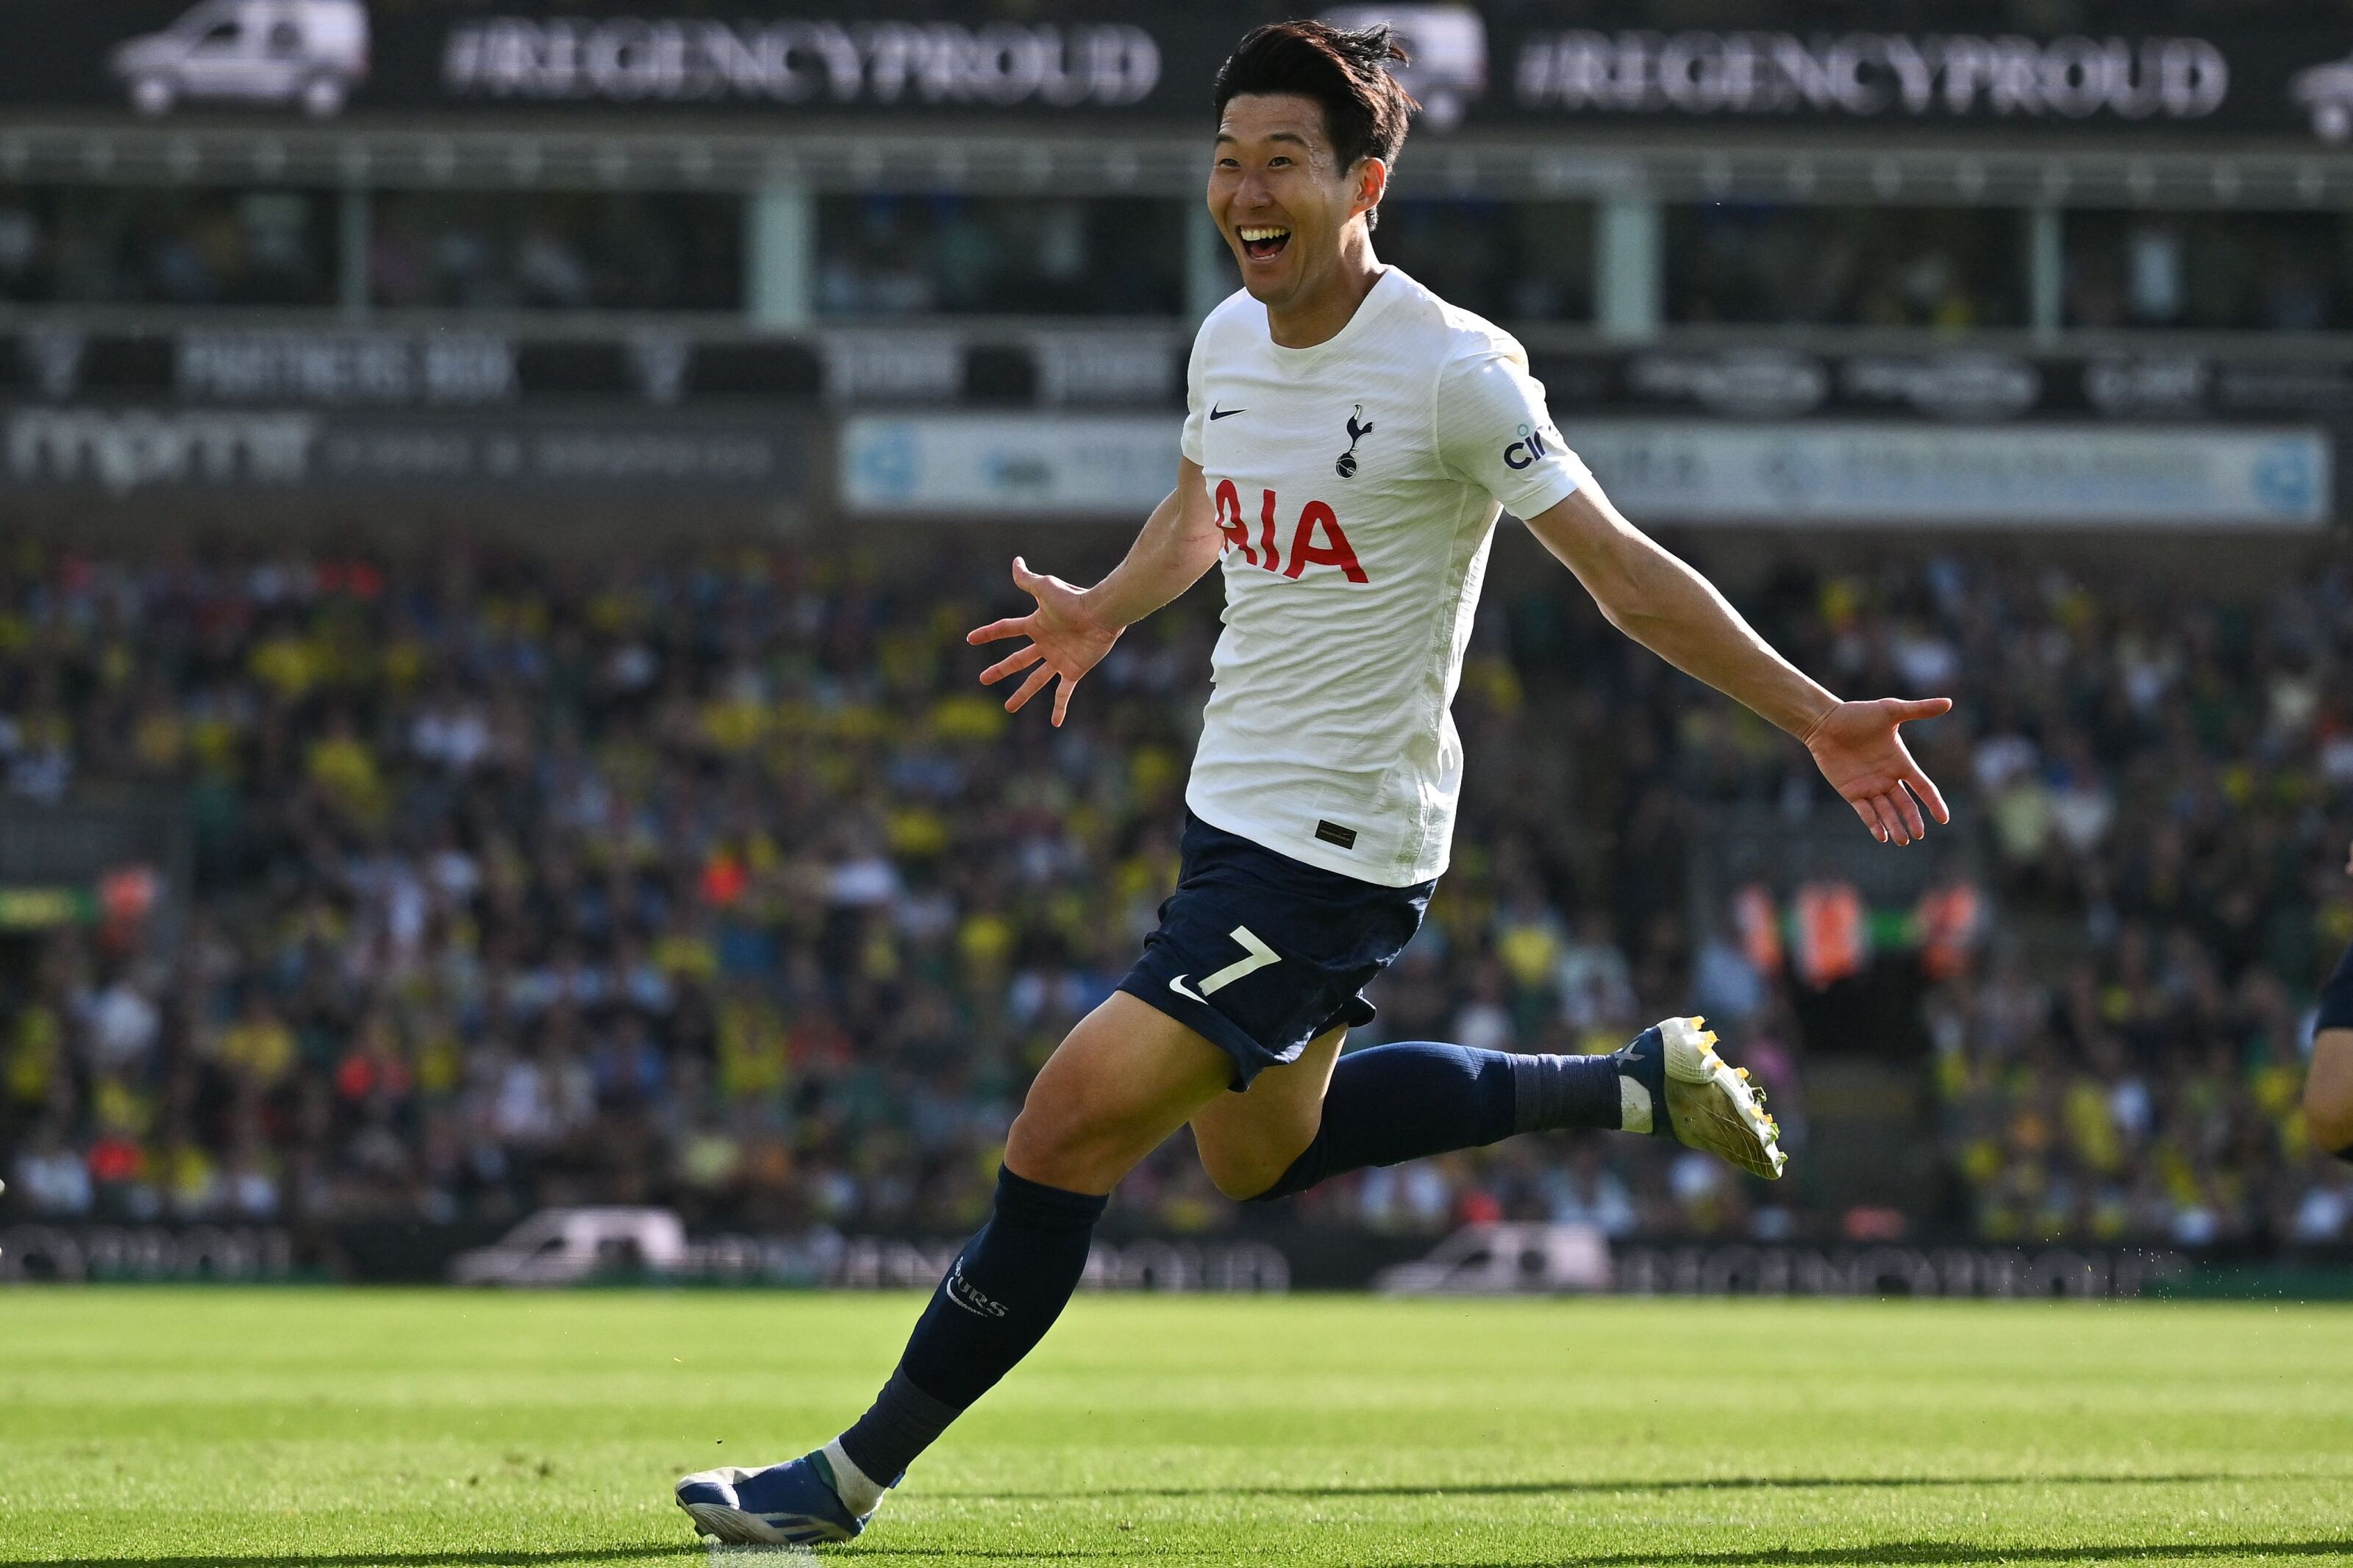 Tottenham eliminated from Champions League: Heung-Min Son's signs